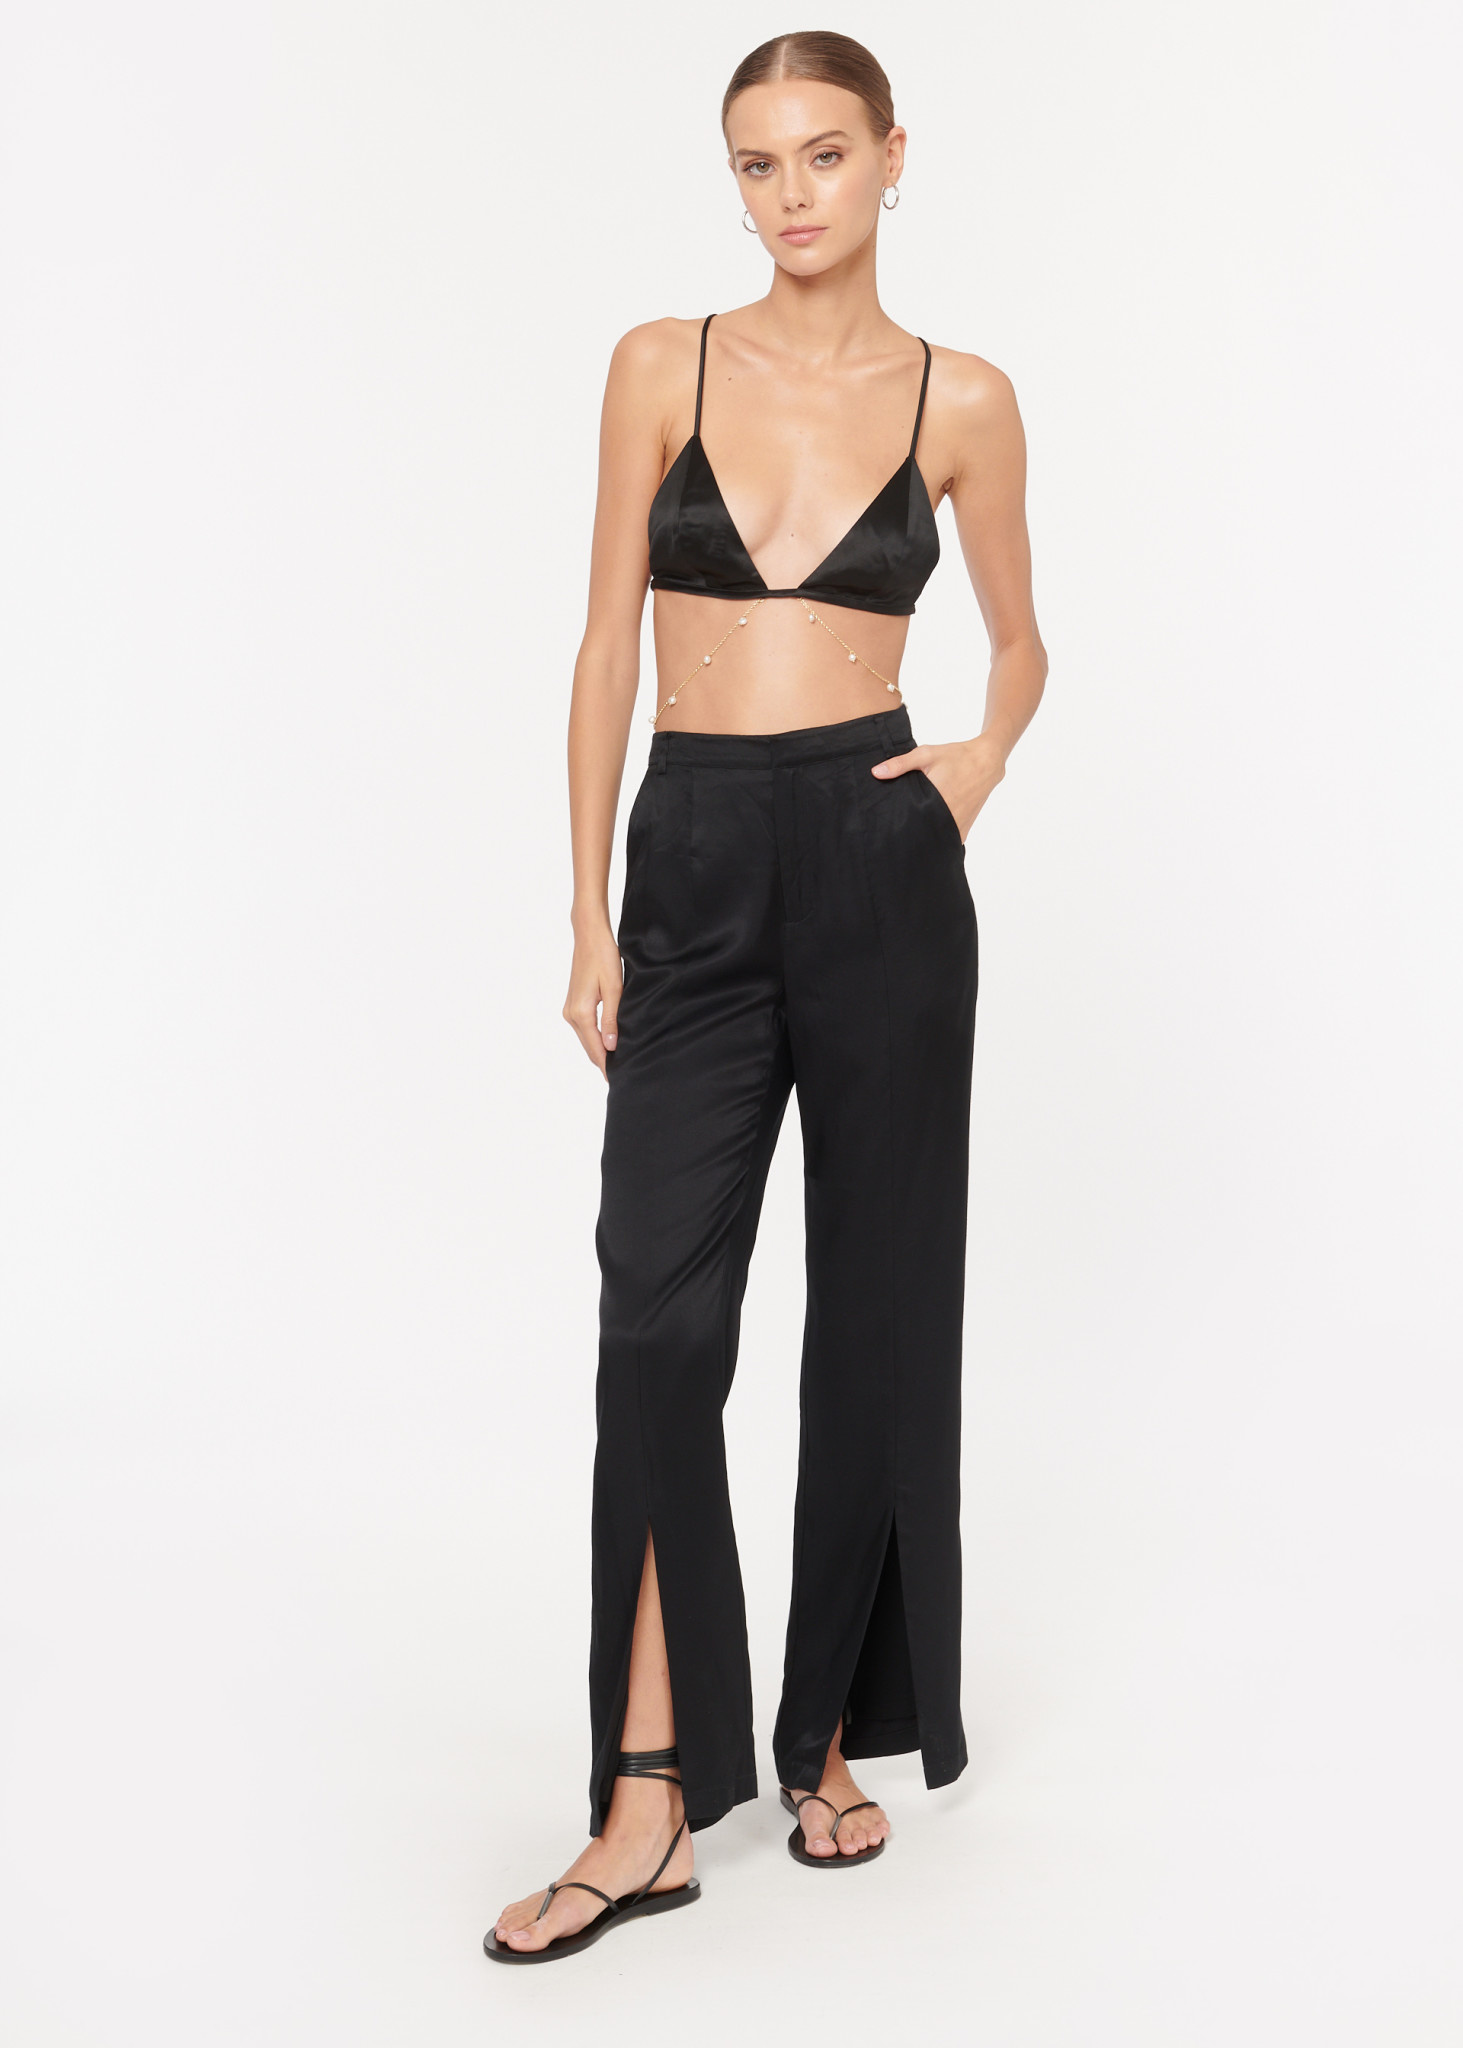 Classic and Timeless: CAMI NYC Amelie Twill Pant in Black